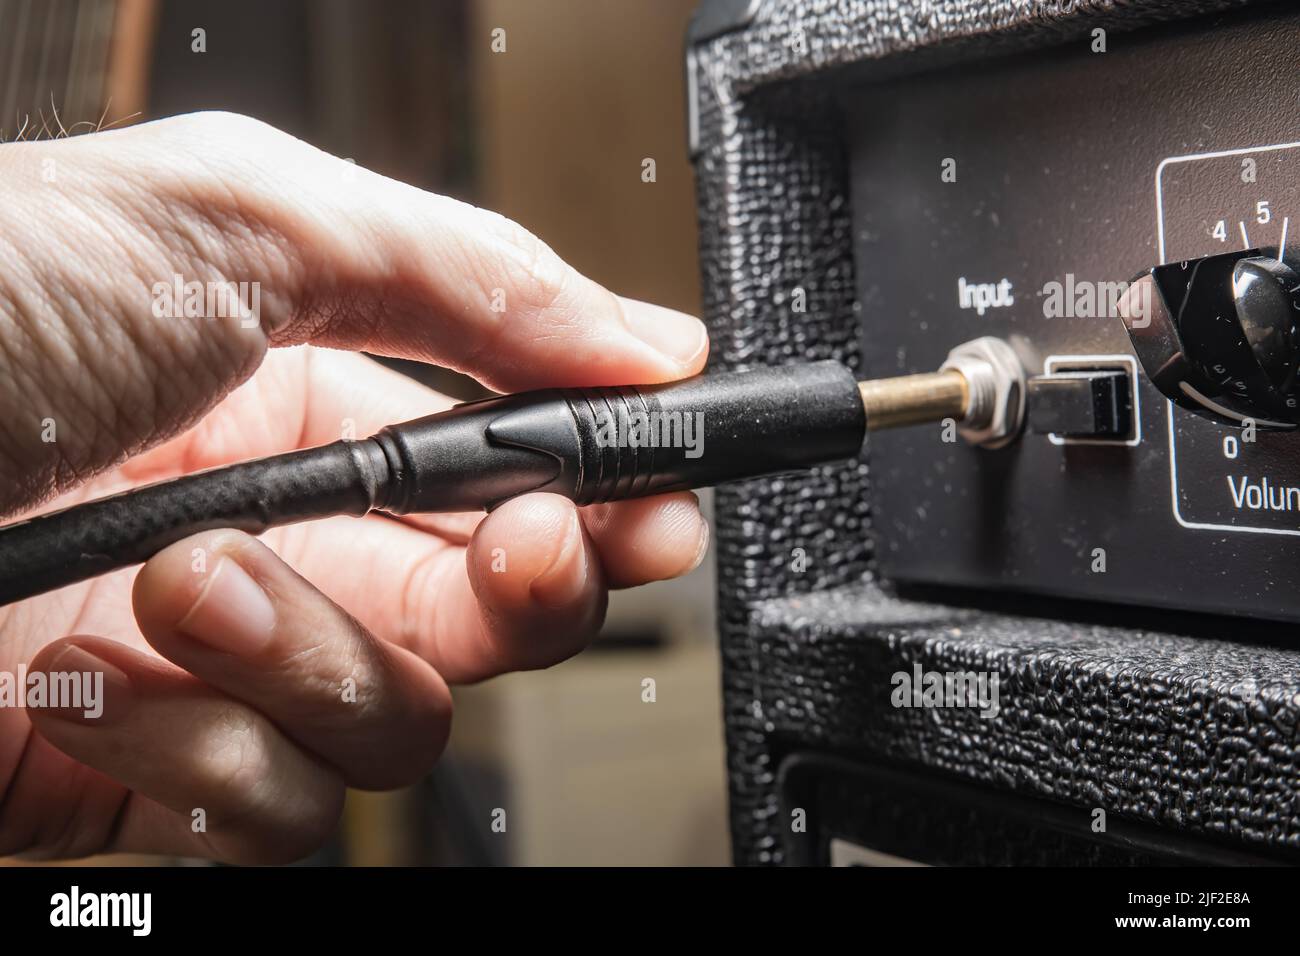 Plugging an instrument cable into a guitar amplifier Stock Photo